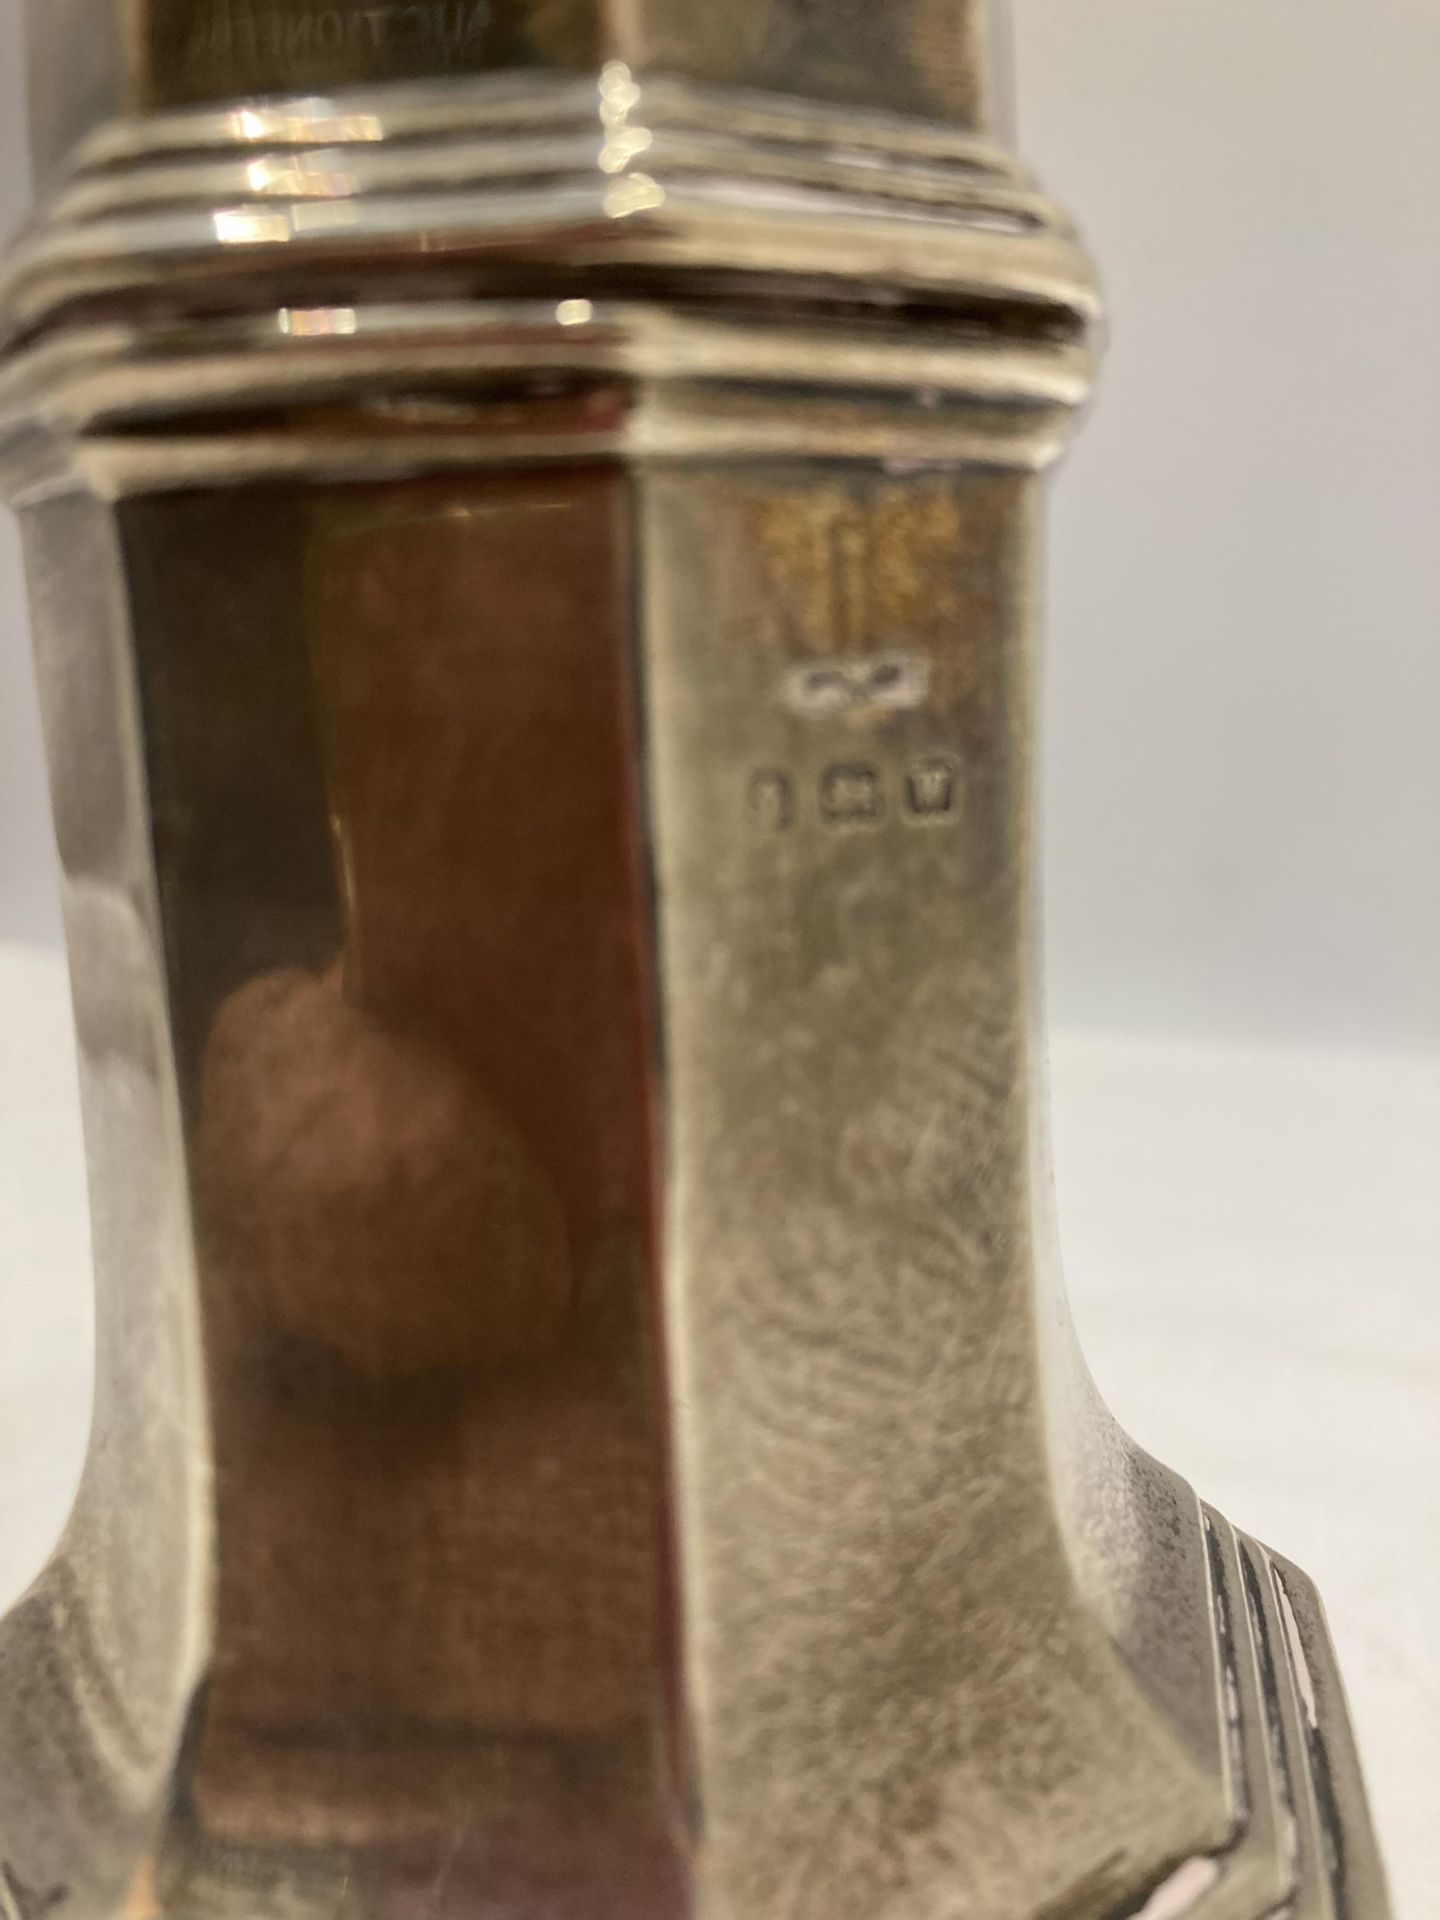 A HALLMARKED BIRMINGHAM SILVER SIFTER GROSS WEIGHT 229 GRAMS - Image 5 of 5